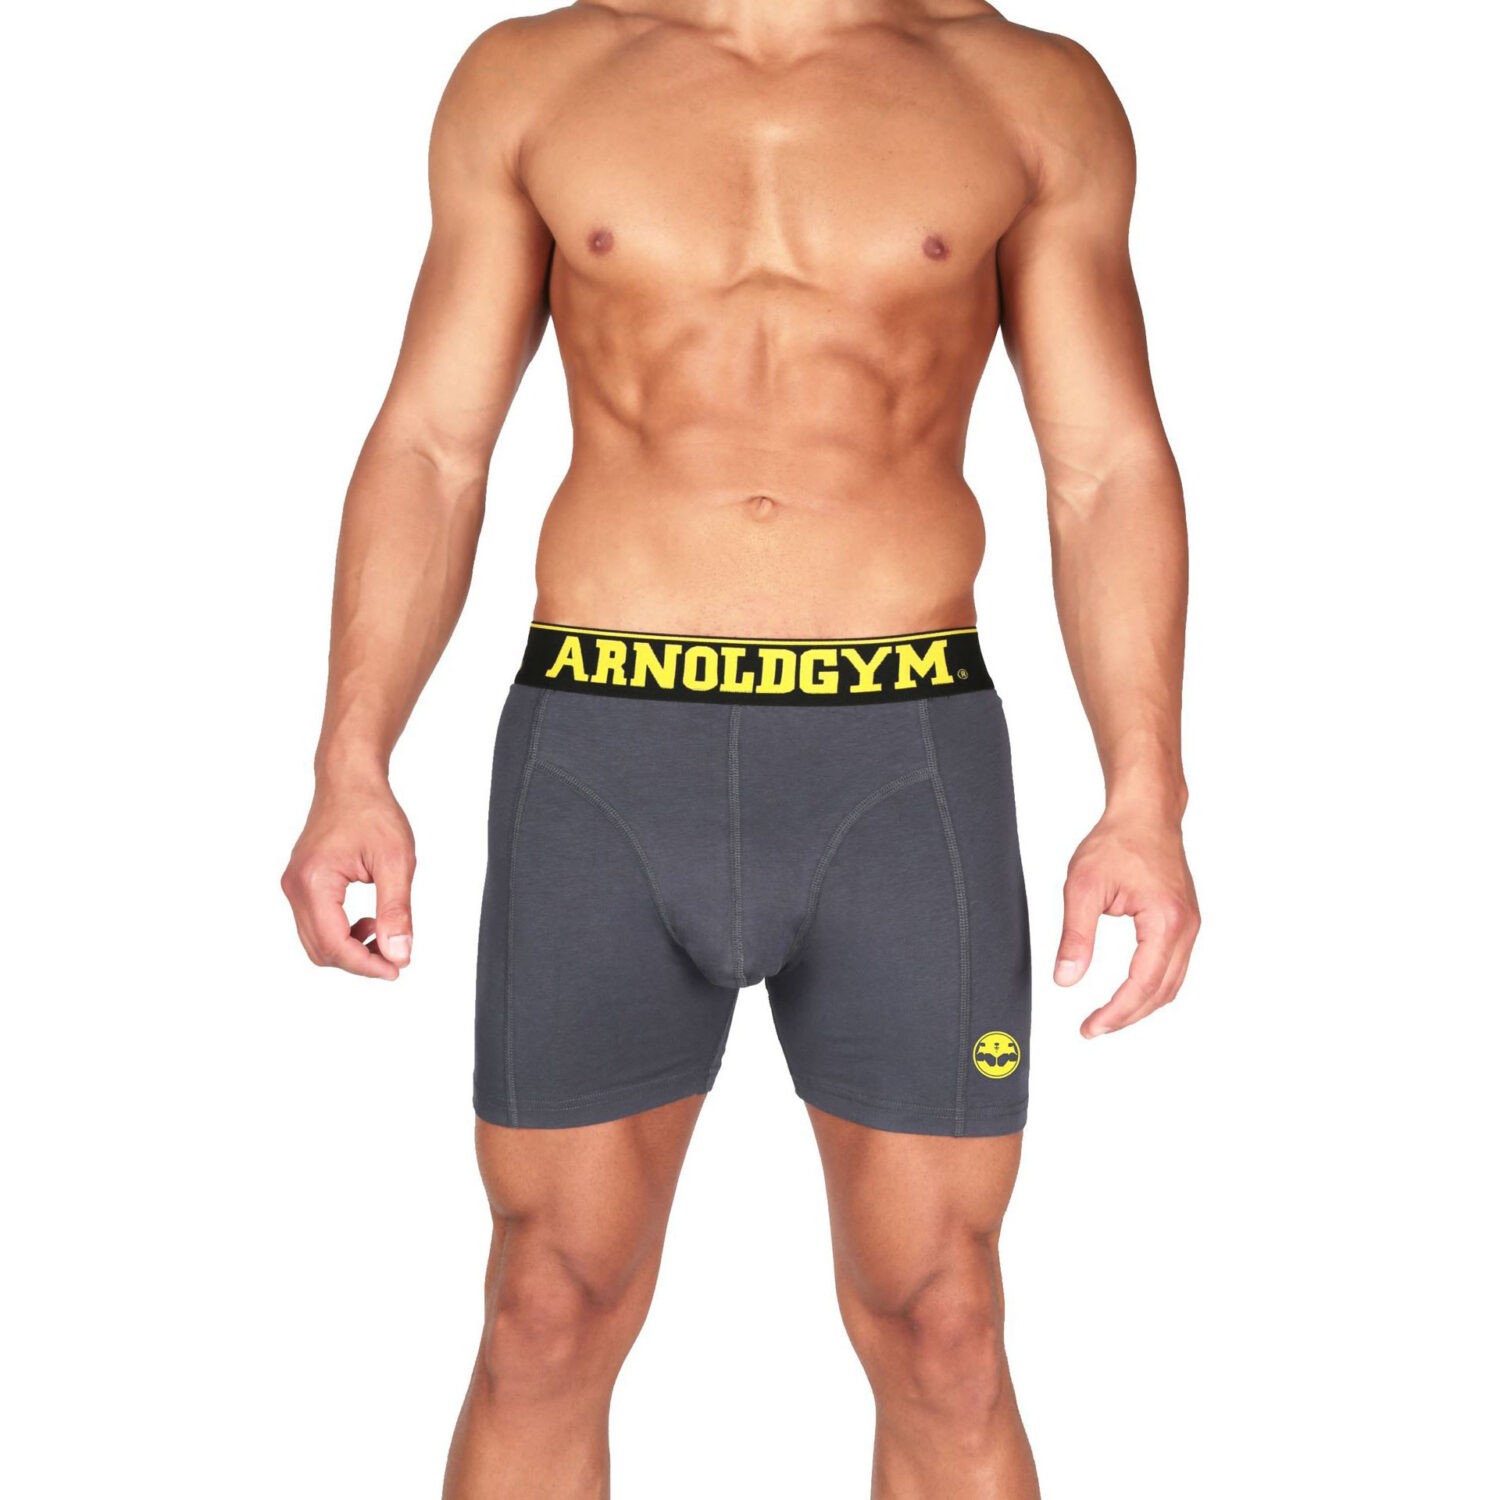 https://www.arnoldgymgear.com/wp-content/uploads/2020/09/0000448_arnold-gym-olympic-series-anthracite-boxers-2-pack.jpeg